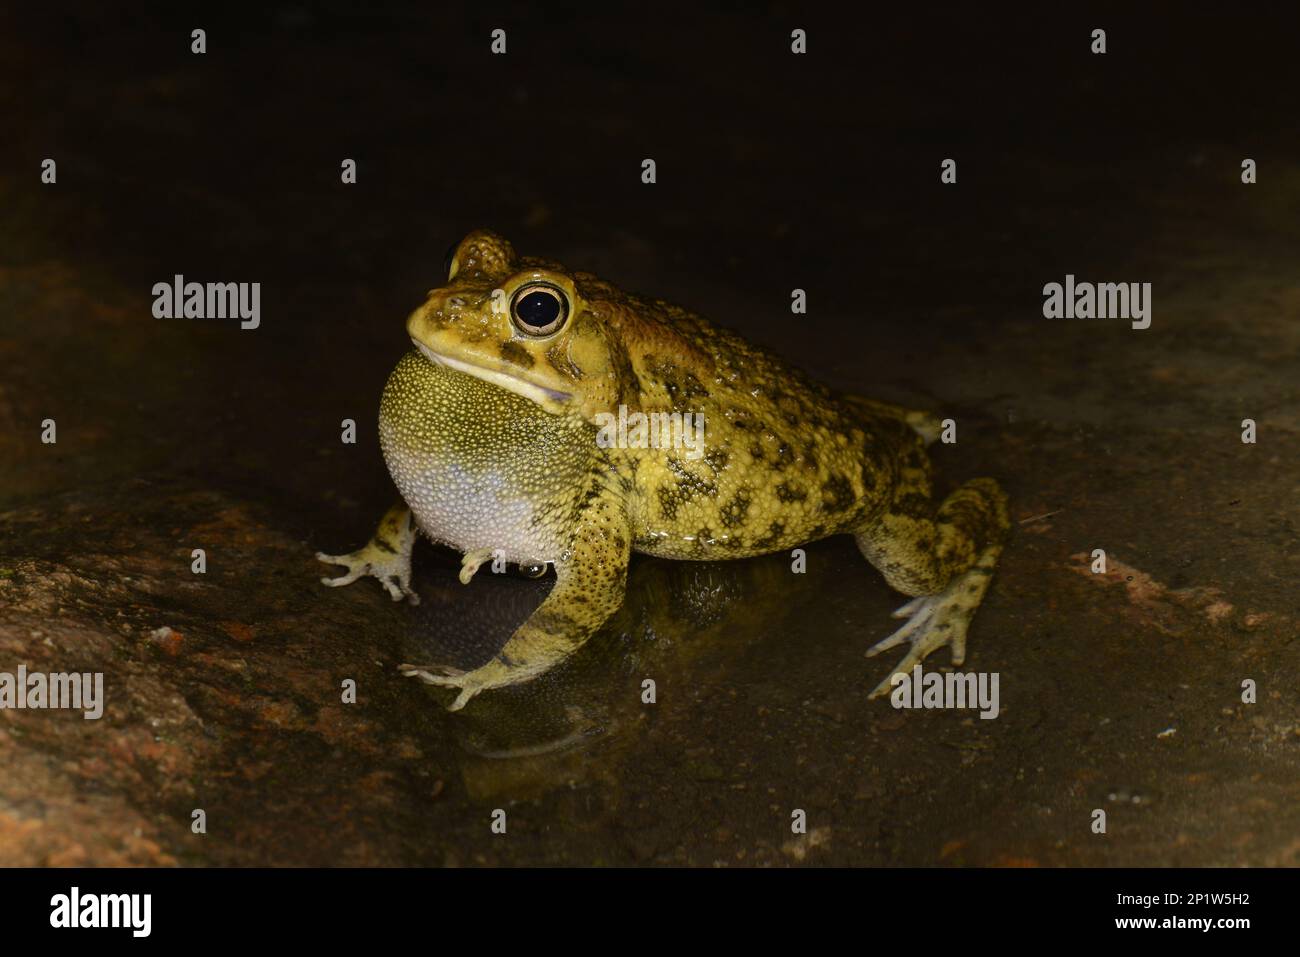 Eastern Olive Toad (Amietophrynus garmani) adult male, calling with throat sac inflated, in shallow water, Lusaka, Zambia Stock Photo